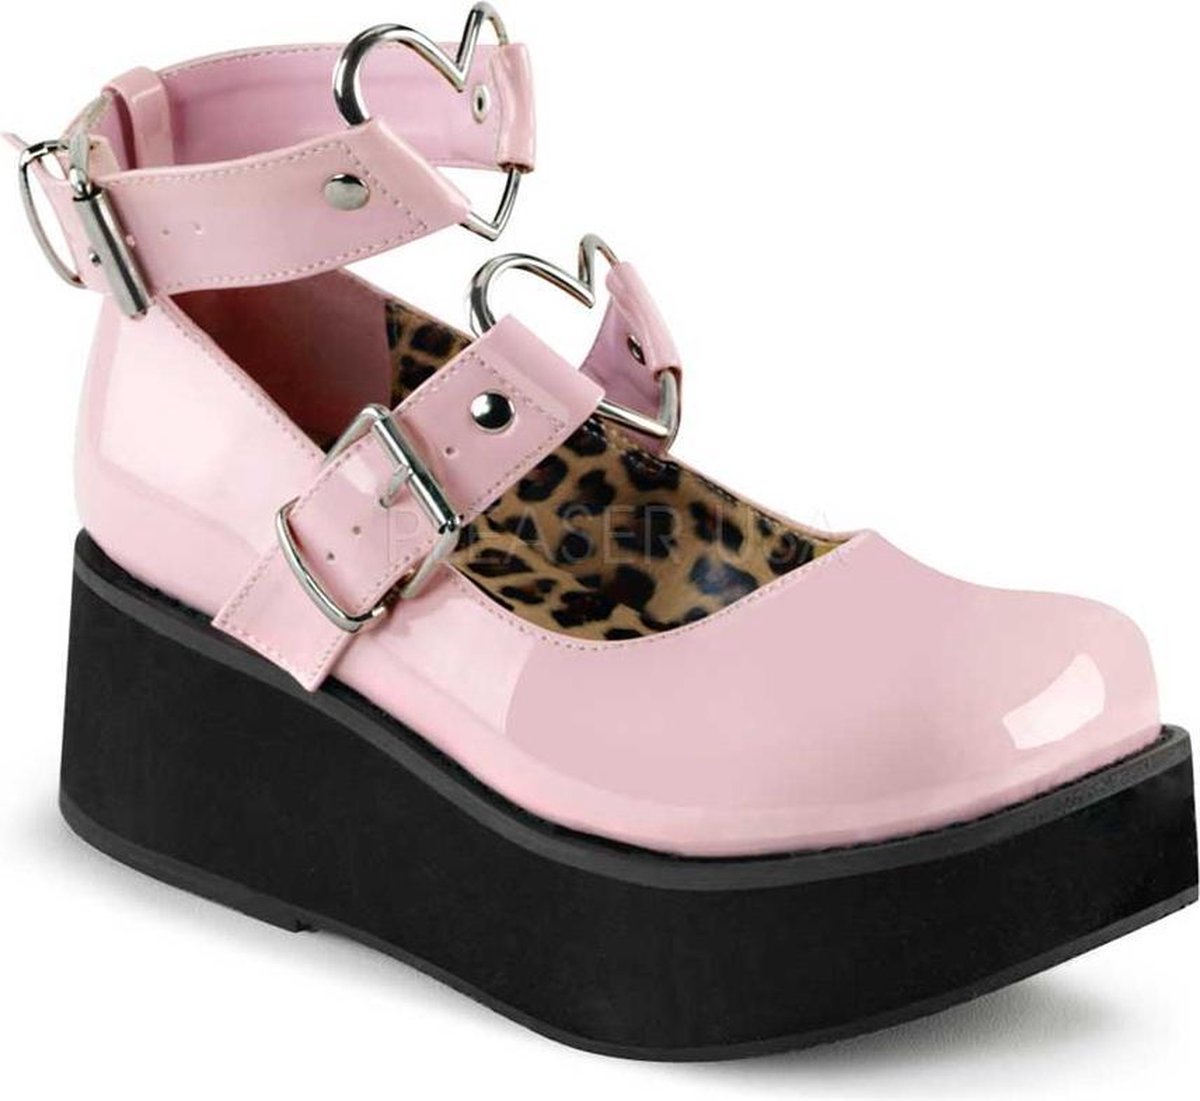 Demonia Sprite 02 shoe with ankle straps buckles and metal heart rings patent pink 5 = )